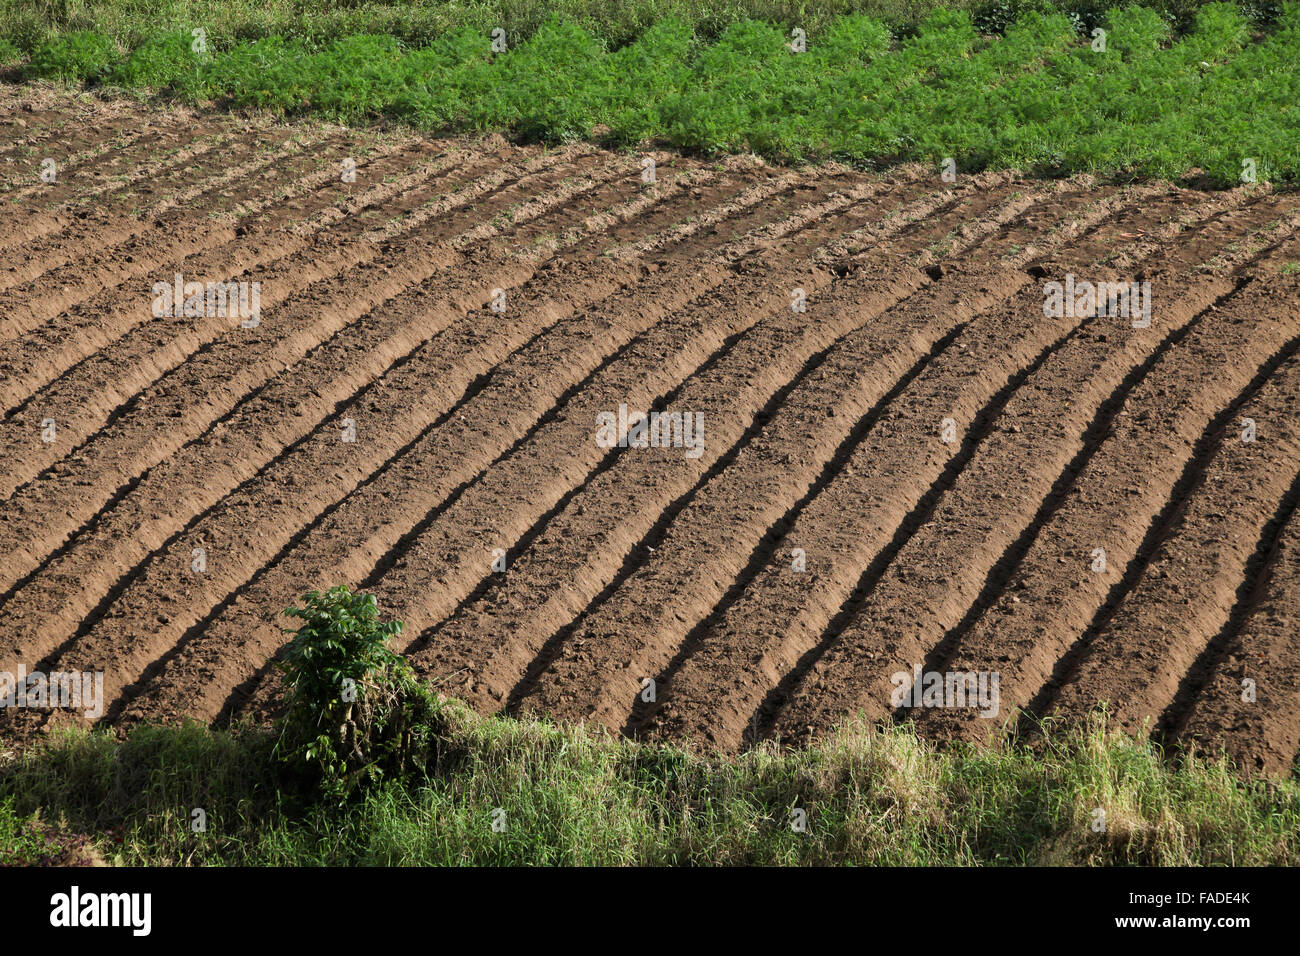 Patterns of an agricultural farmland in Tomohon, North Sulawesi, Indonesia. Stock Photo